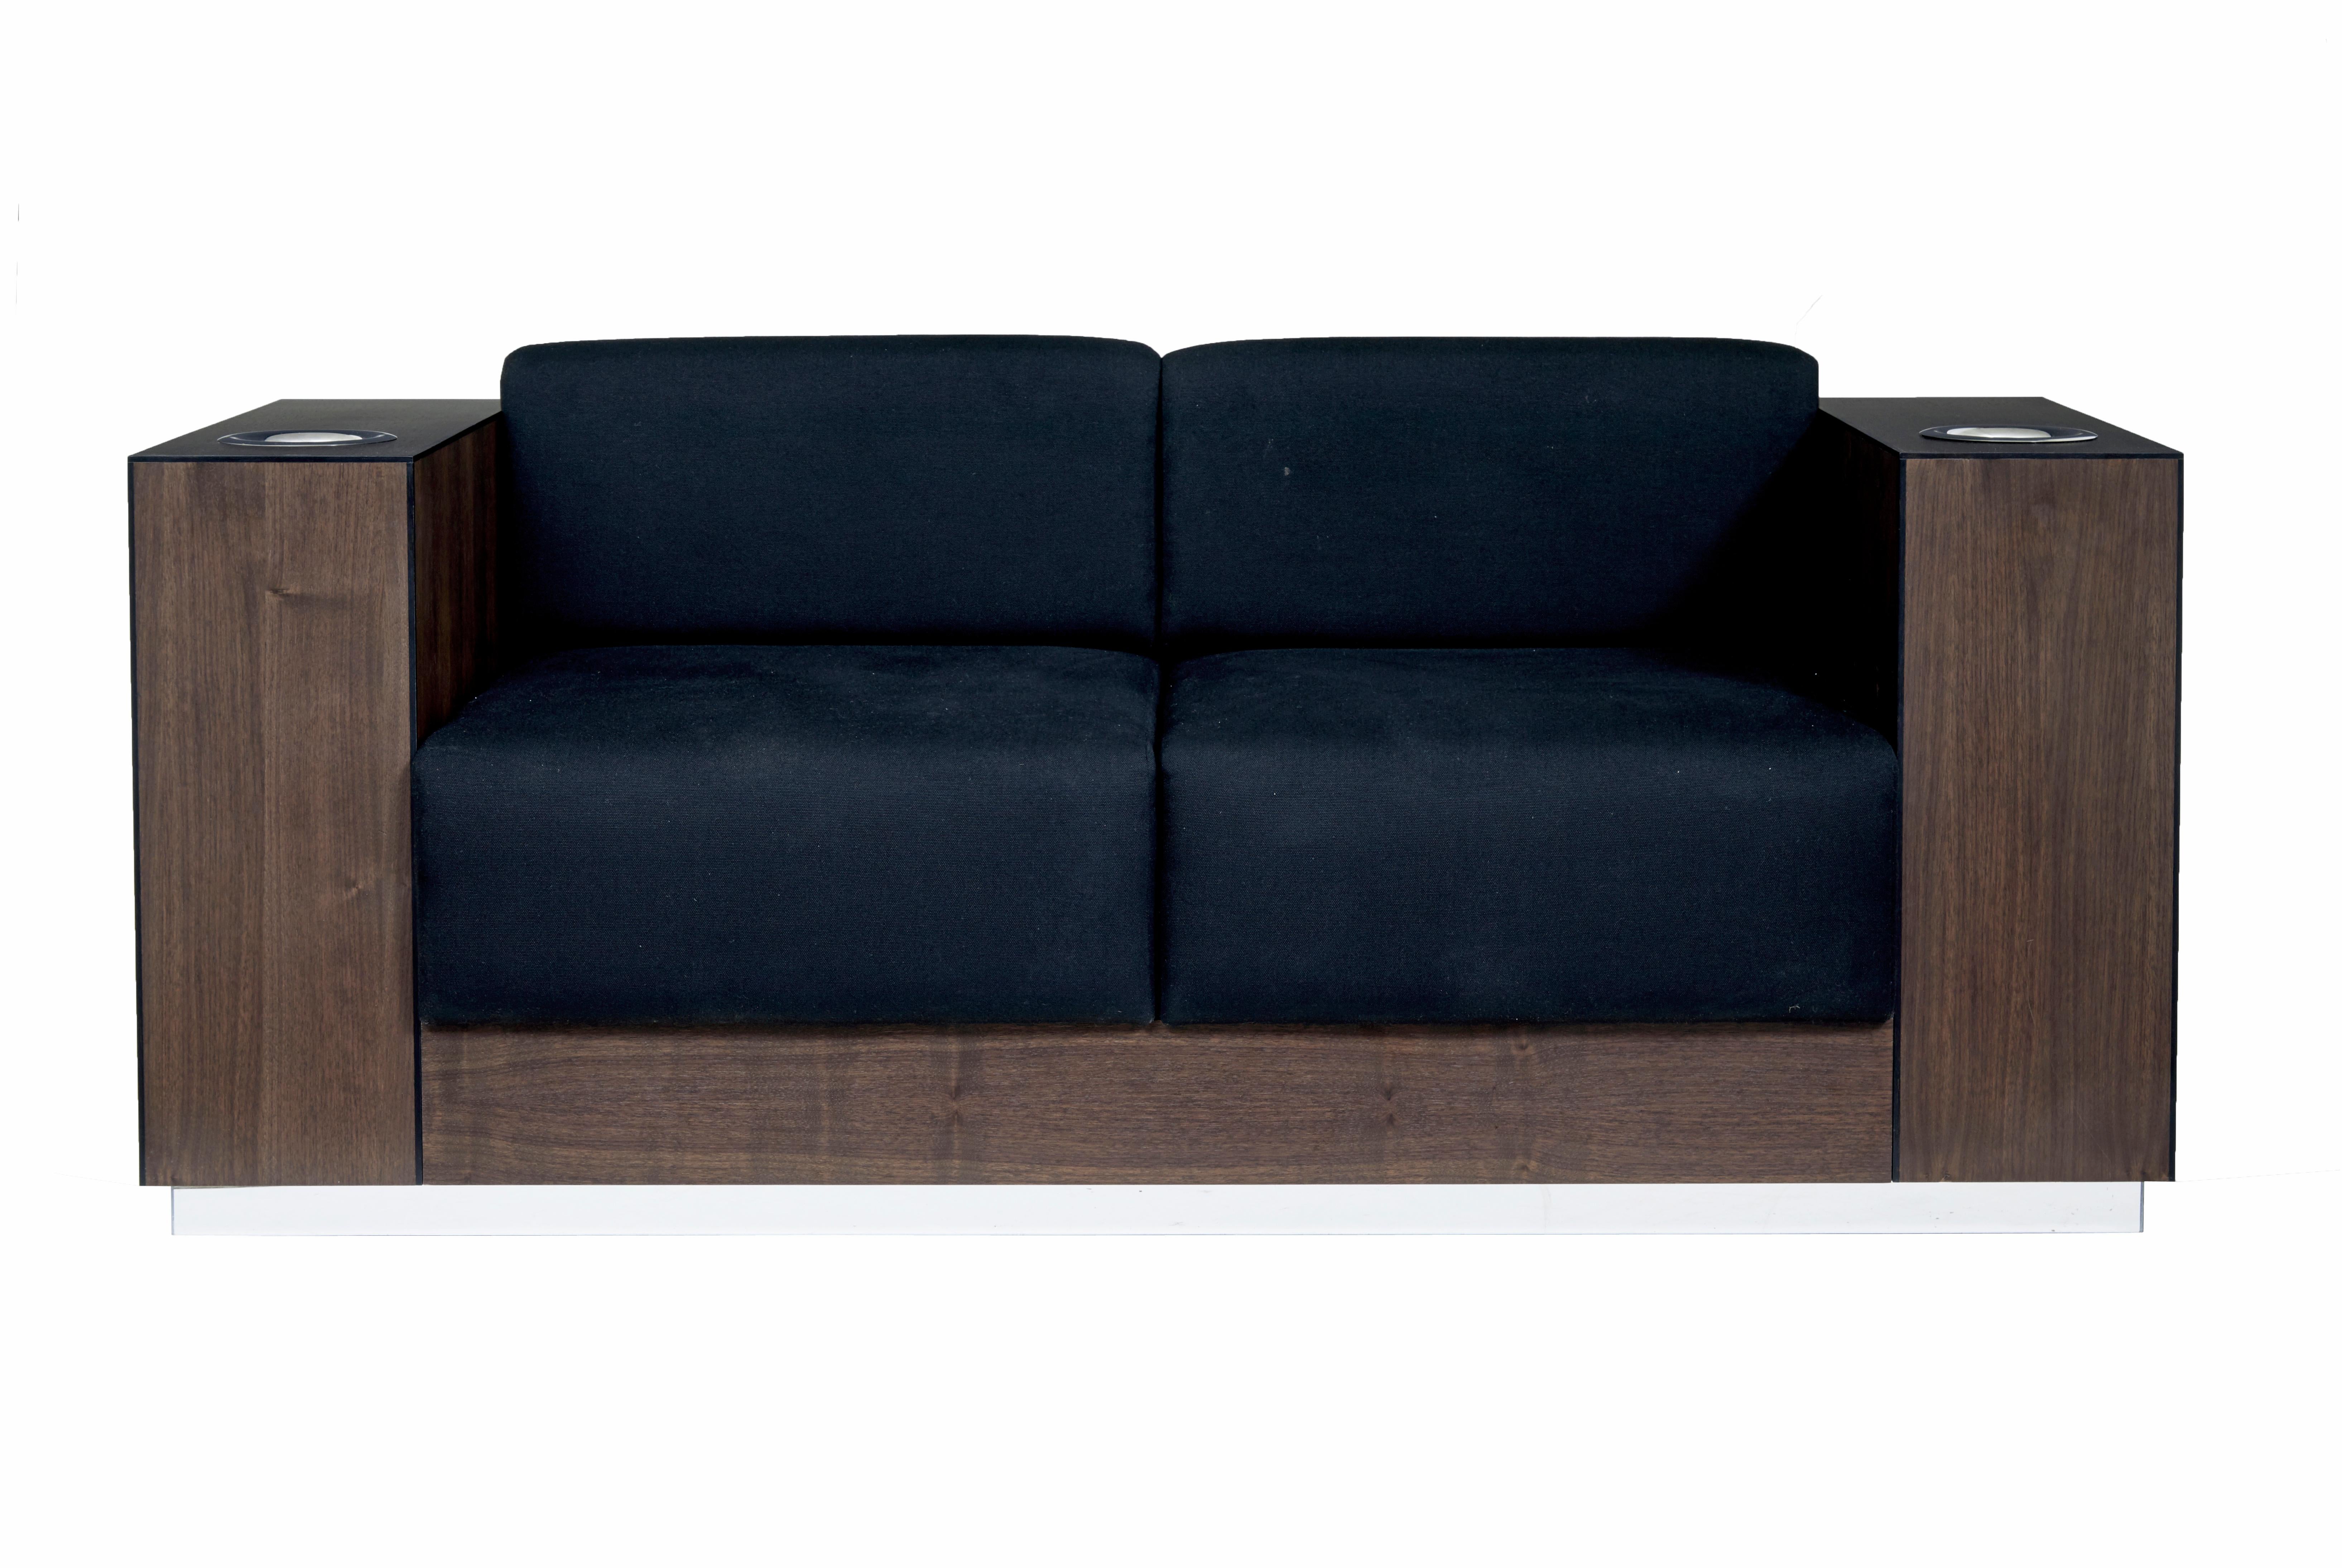 English Modern walnut sofa fitted with kaelo wine coolers For Sale